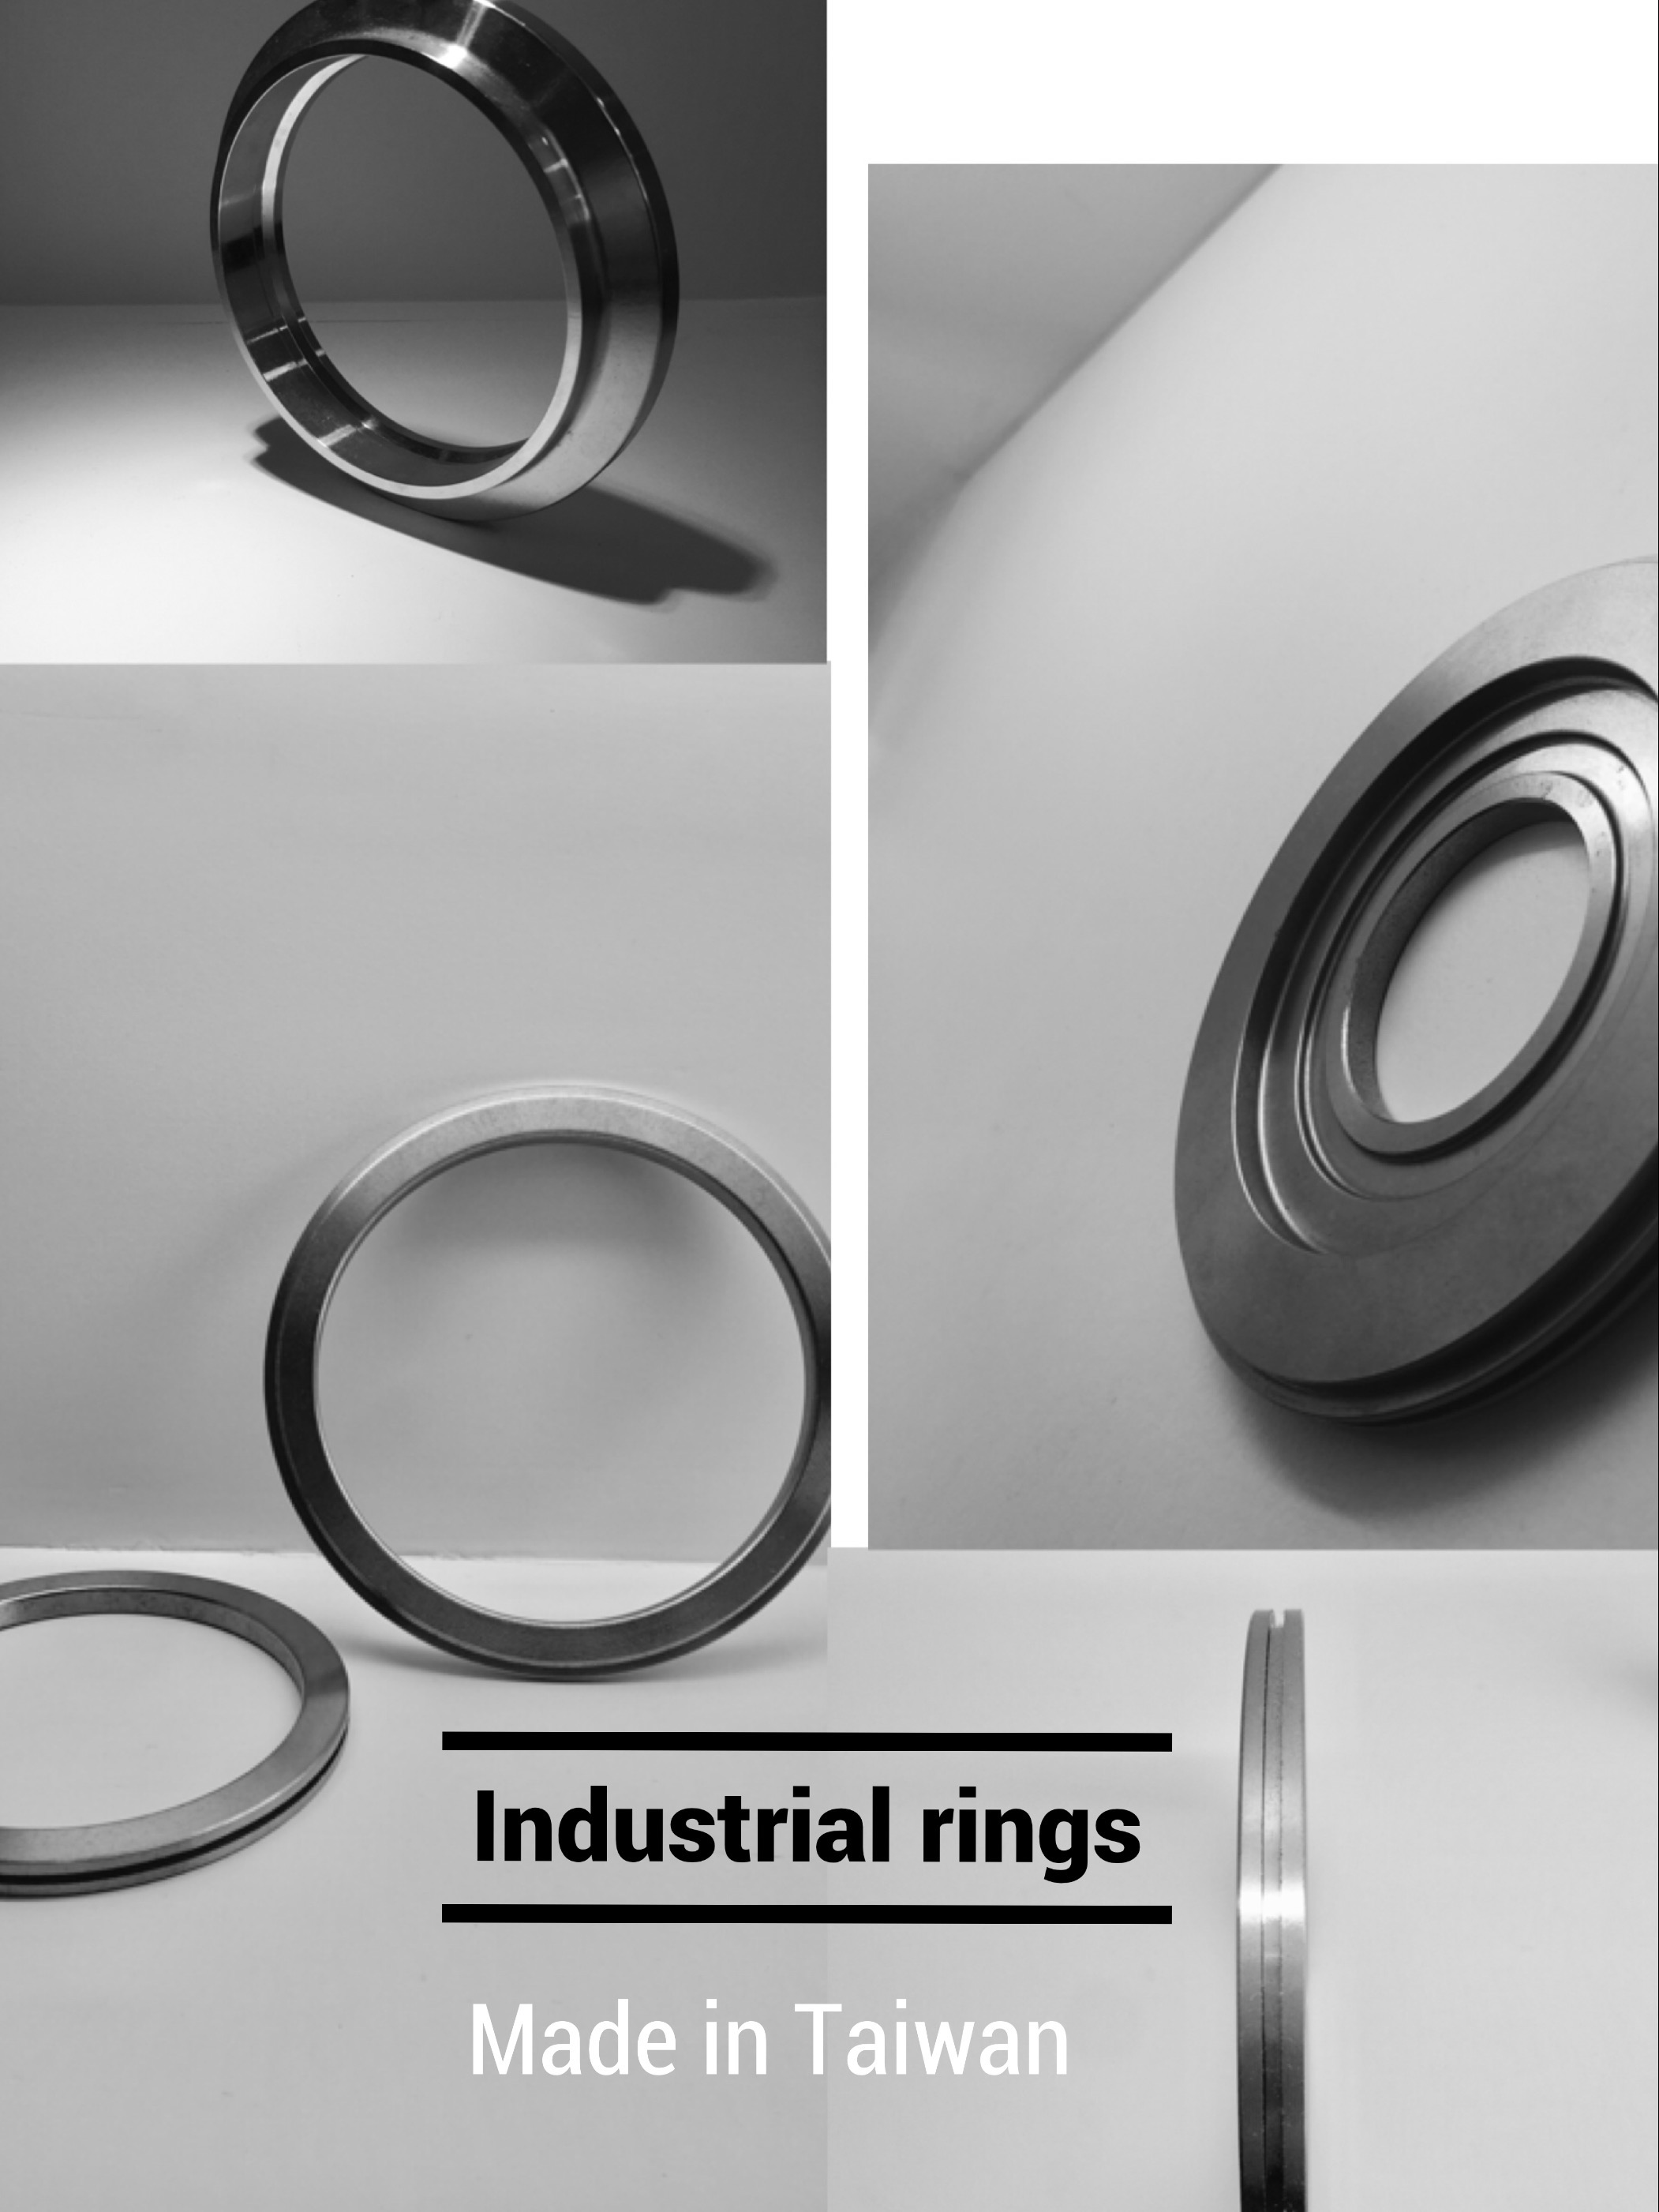 Stainless steel ring that is cut from stainless steel tube produced by centrifugal casting